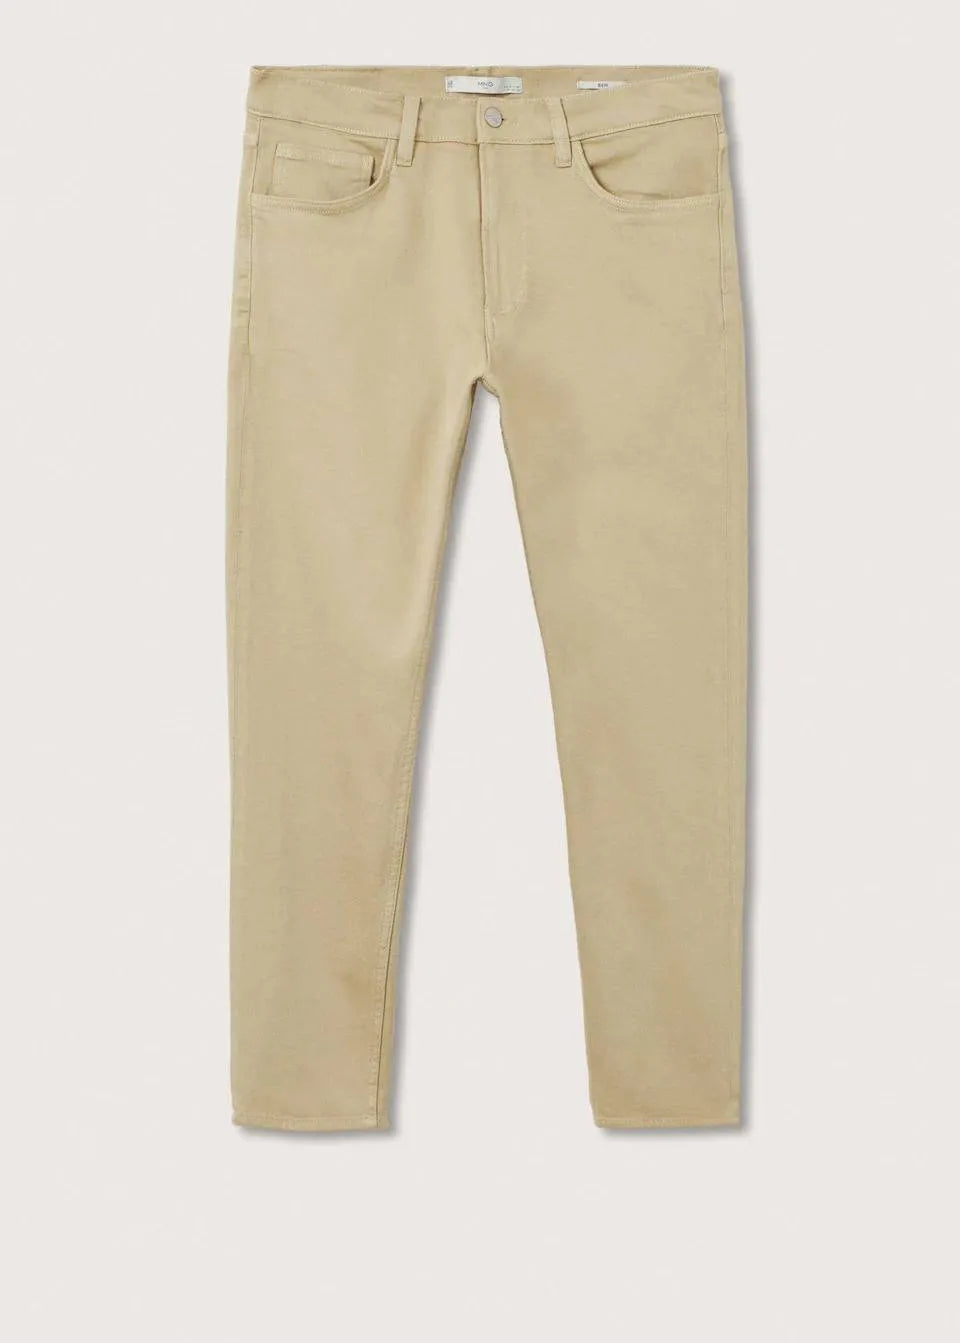 Modern Beige Jeans: Mango's tapered, cropped fit in versatile beige (mention size if relevant).Tapered design for a defined silhouette, cropped length for a modern touch.Consider mentioning any specific details like the fabric composition 